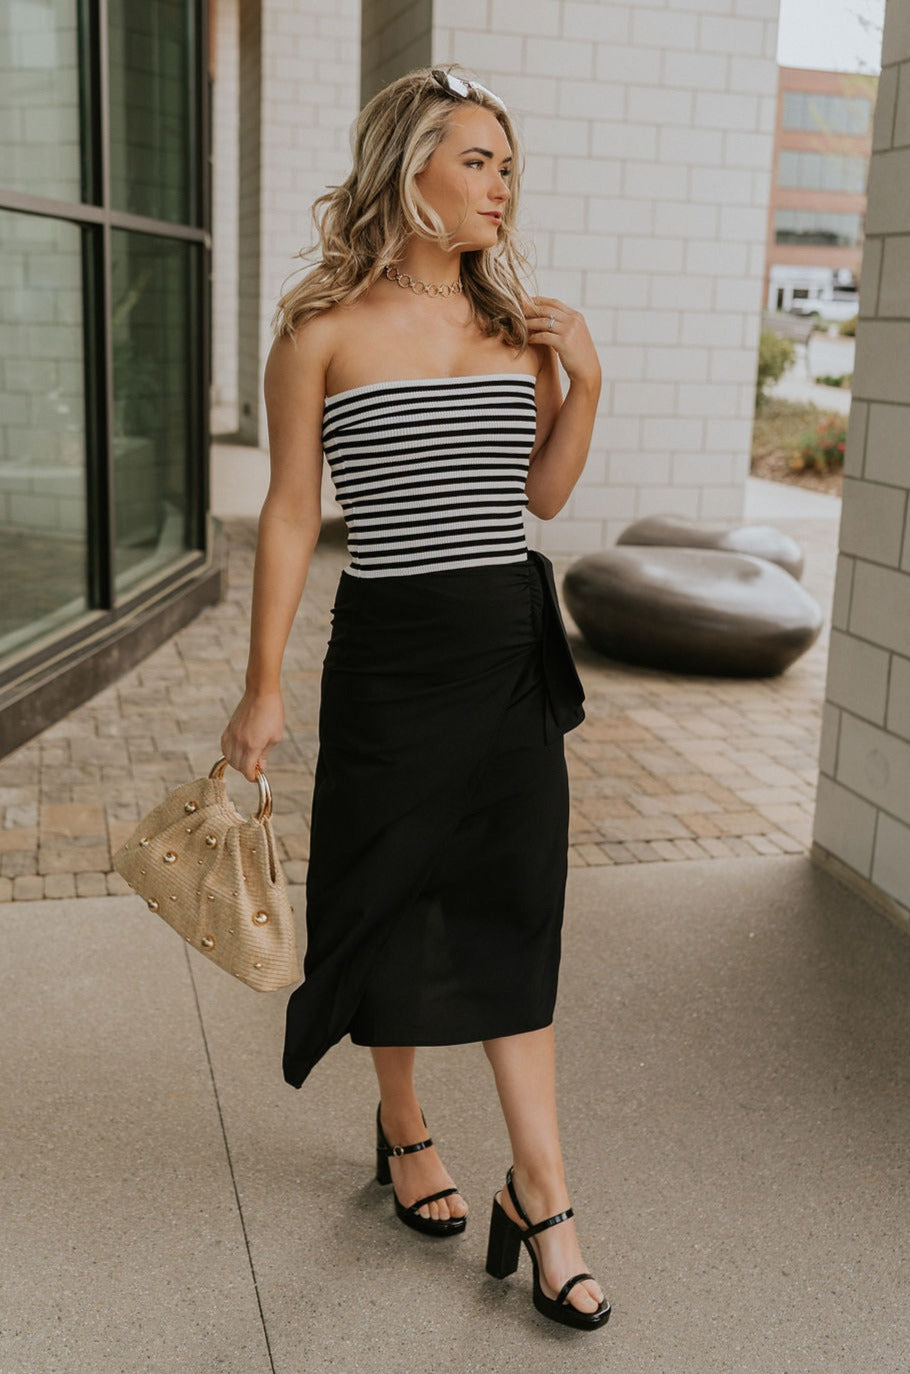 Full body front view of model wearing the Arabella Black Wrap Midi Skirt that has black lightweight fabric, a wrap front with a side tie detail, and back slit. Worn with striped tube top.